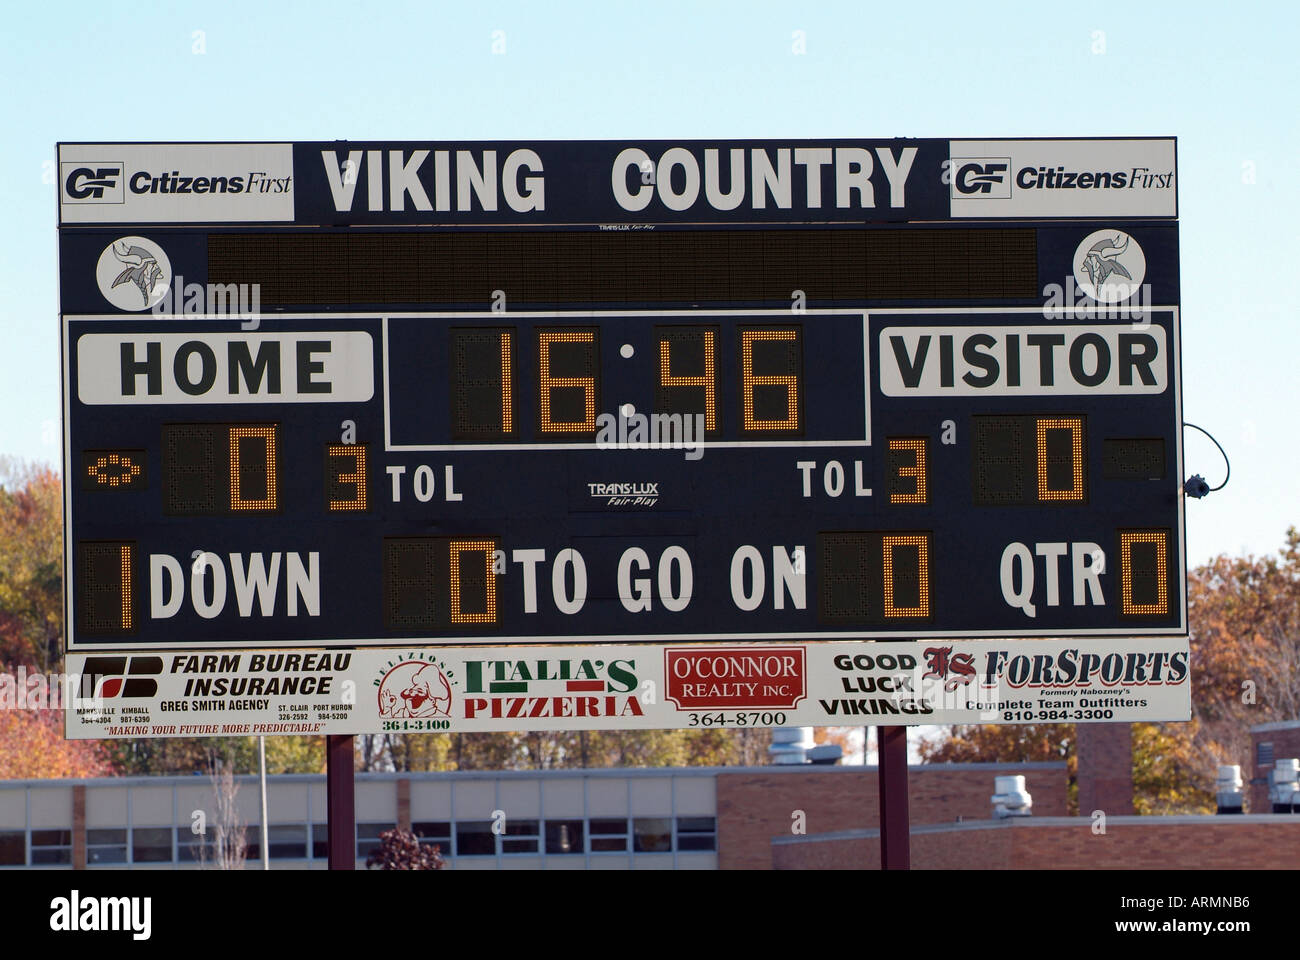 Football game with scoreboard indication the score and time left in a period Stock Photo